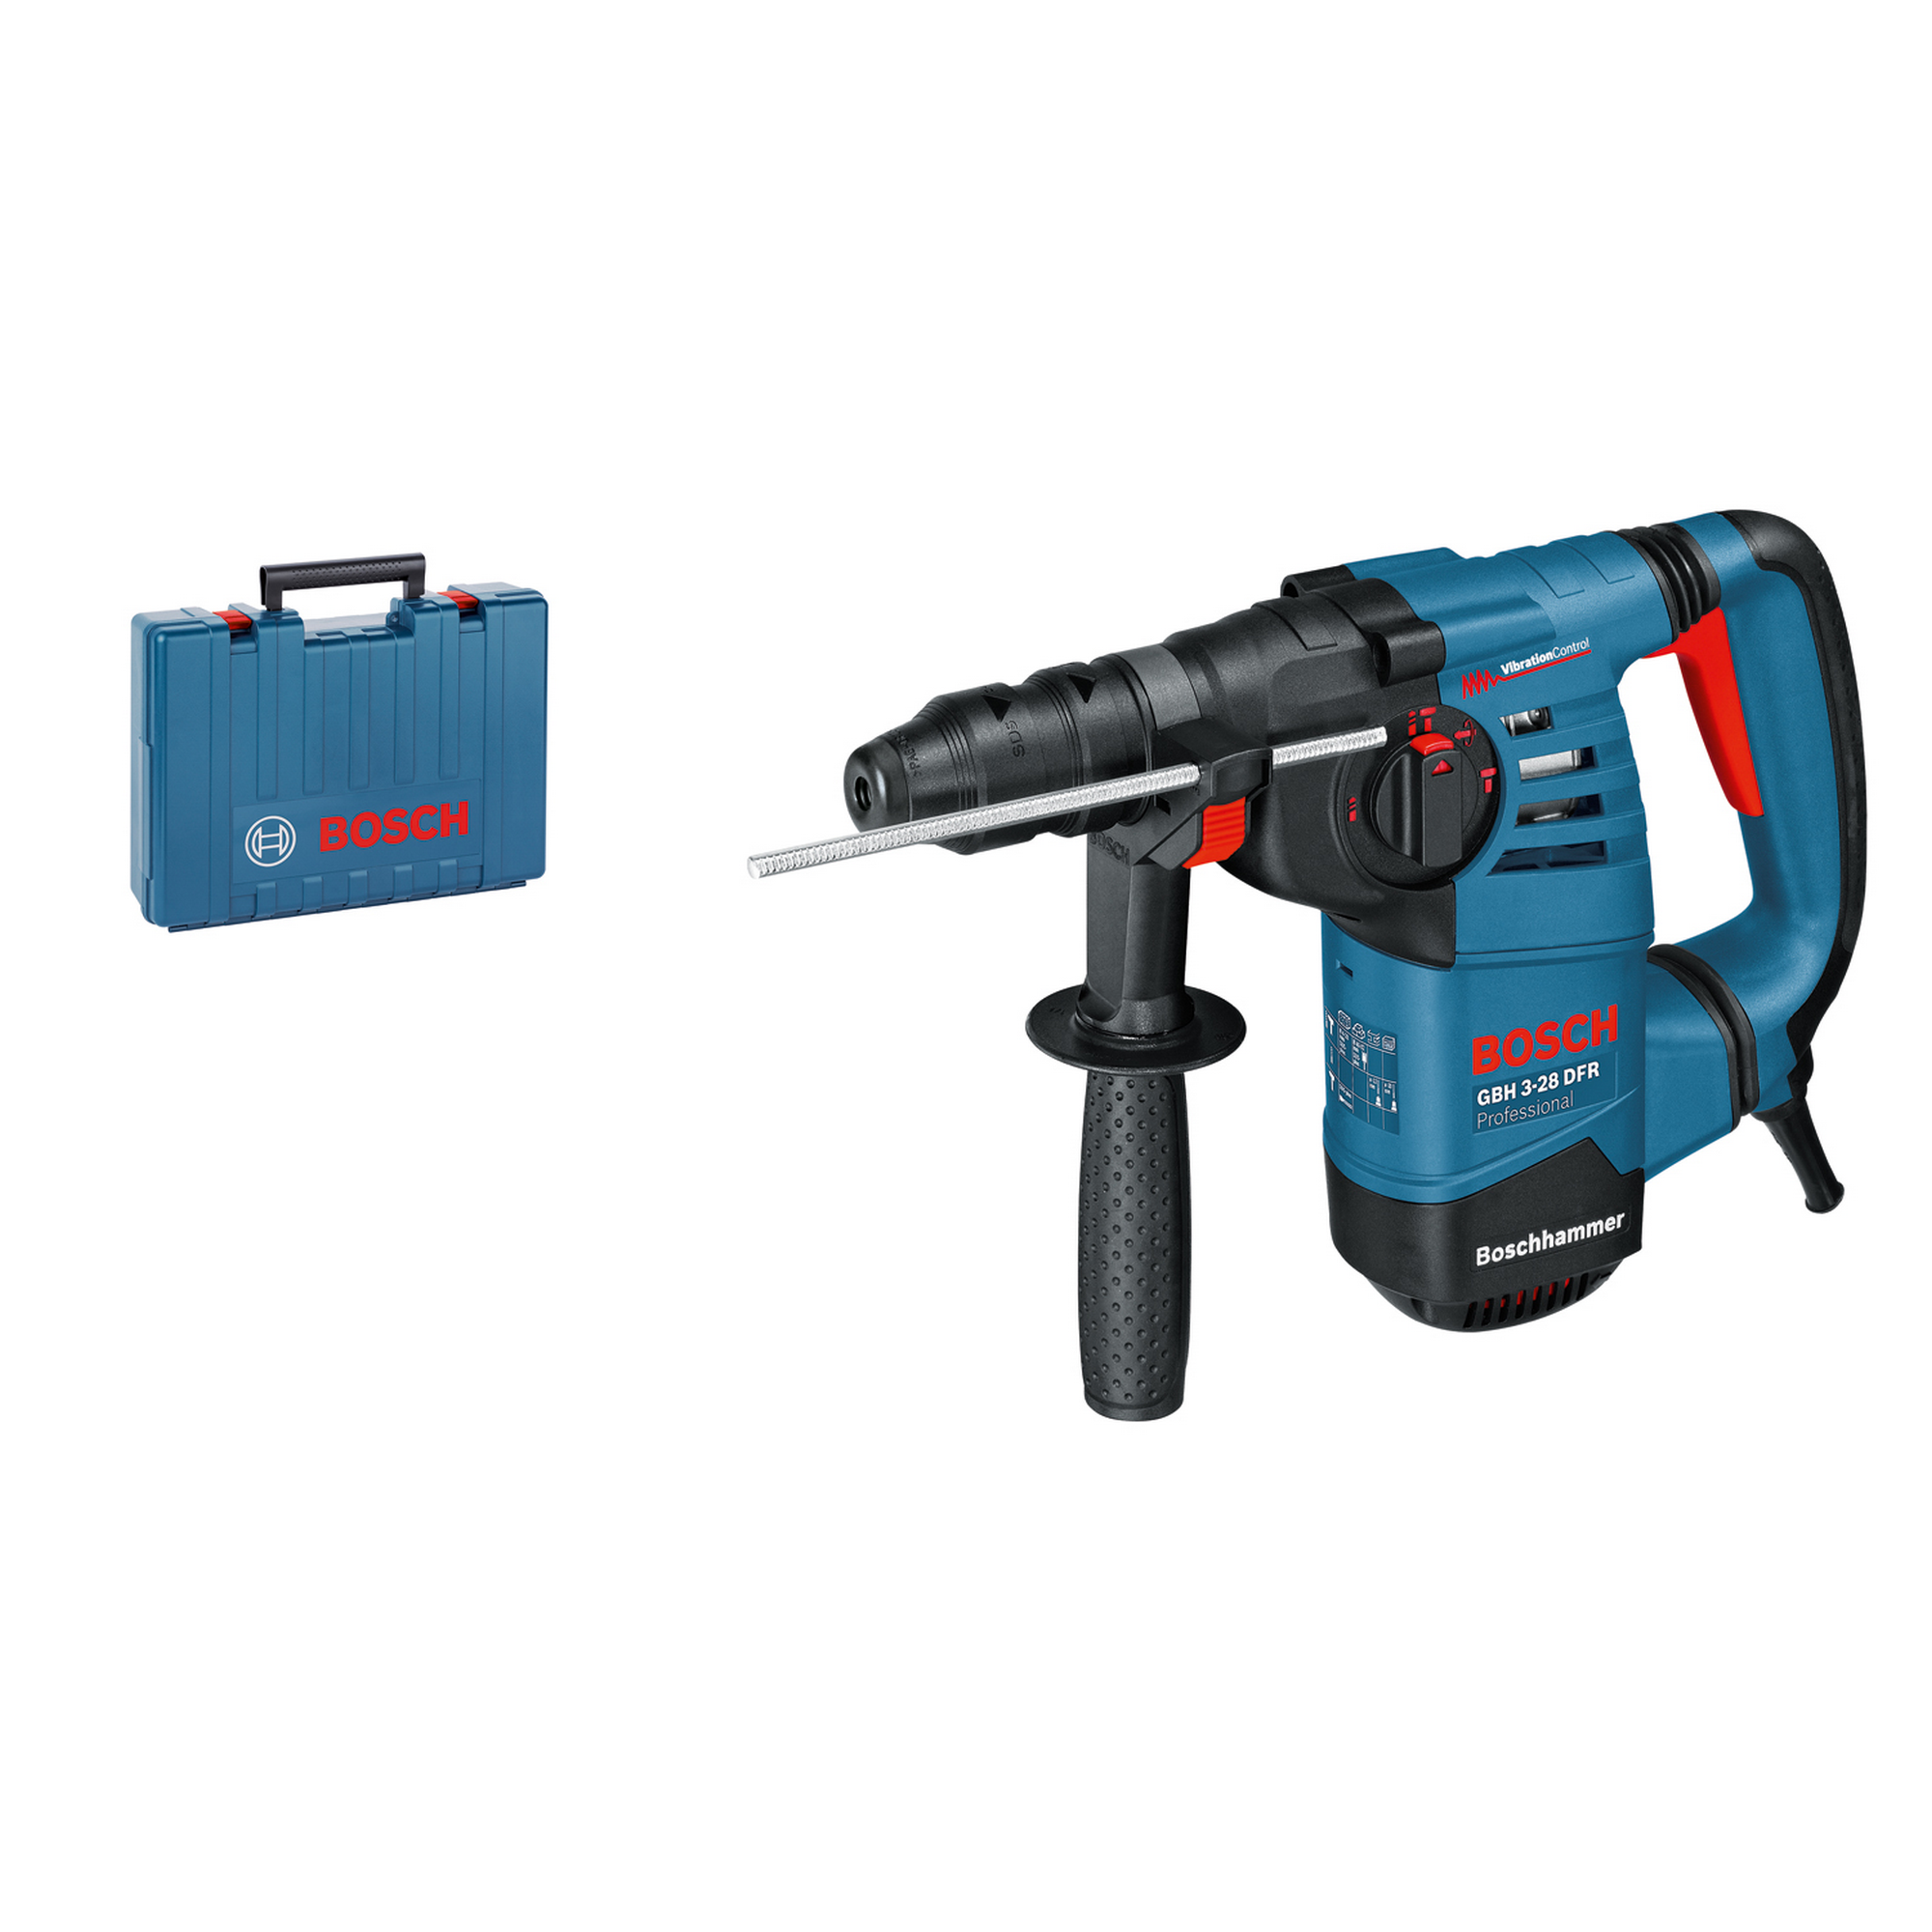 Bohrhammer 'GBH 3-28 DFR Professional' mit SDS plus in Koffer + product picture